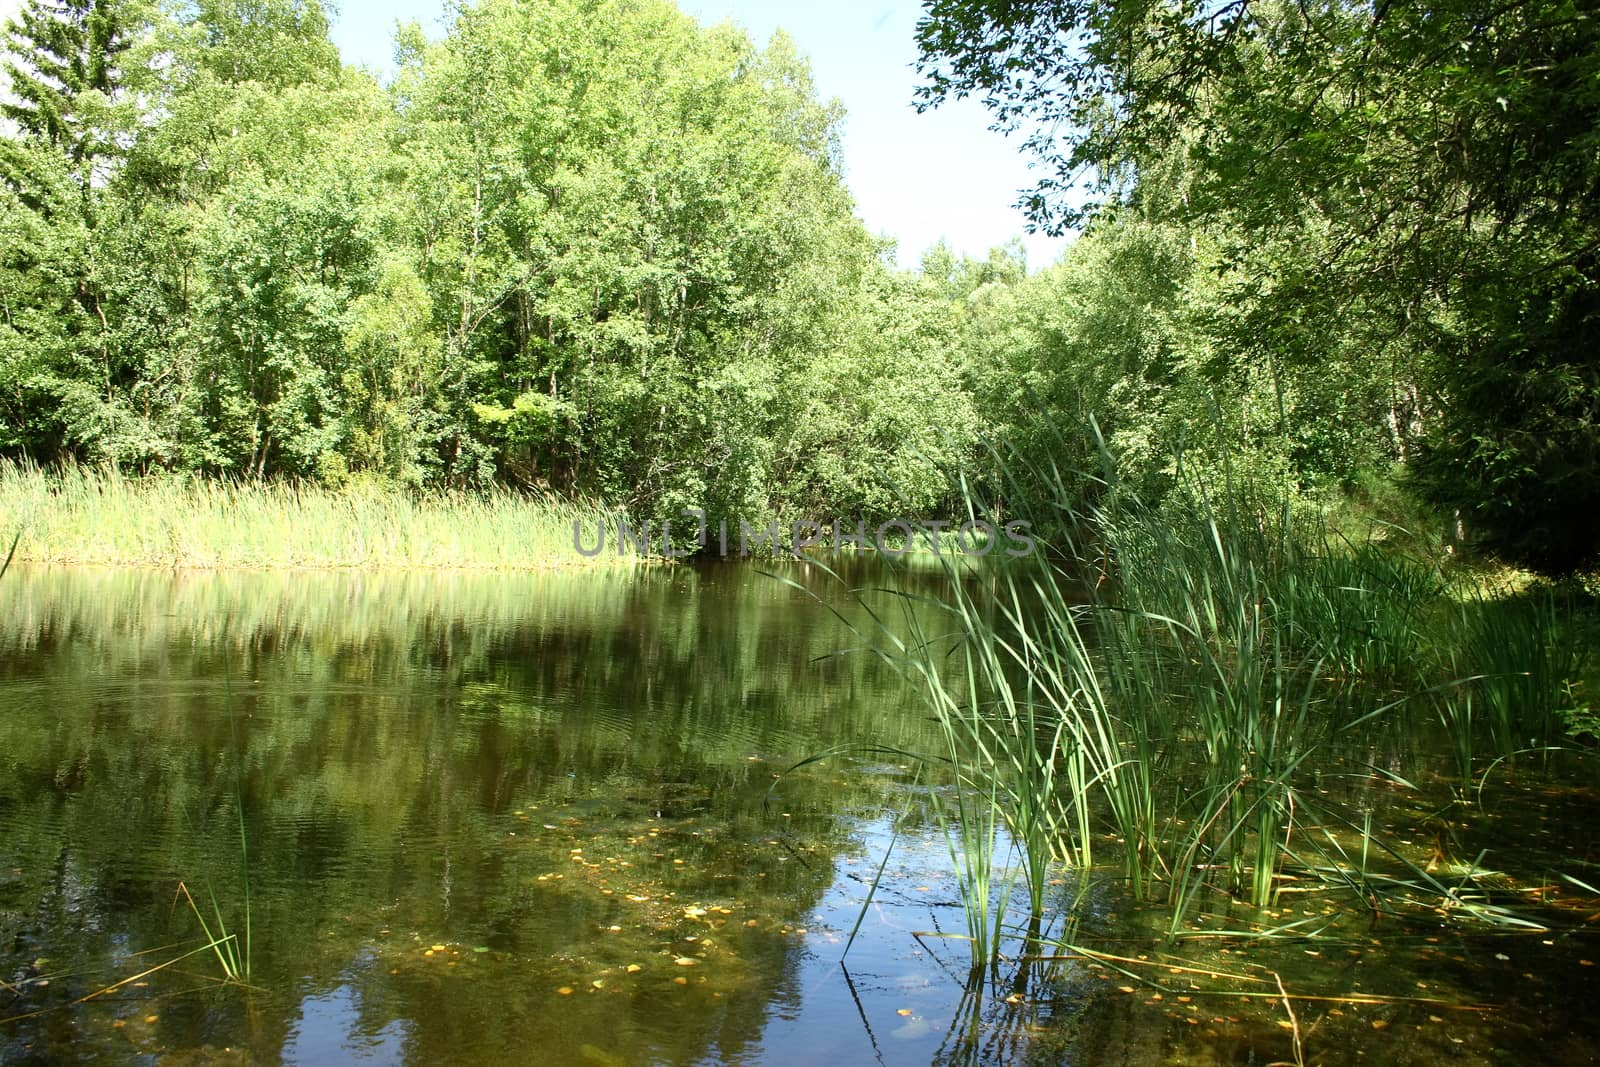 Natural landscape on the shores of an idyllic lake